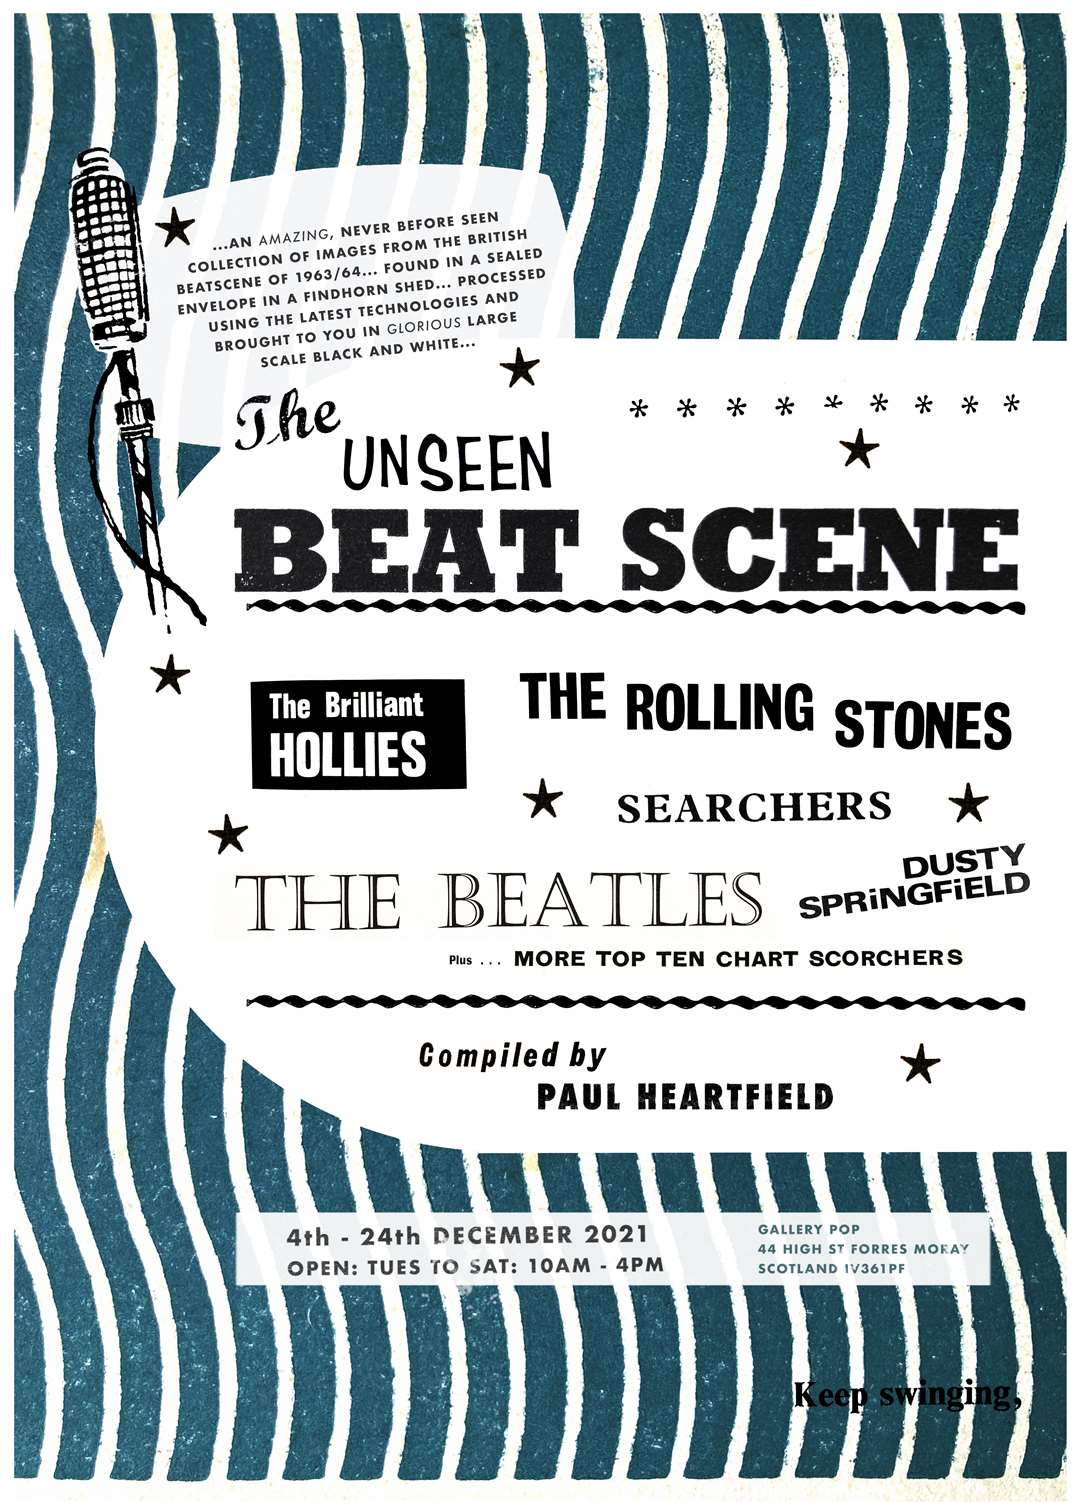 The sixties style flyer advertising the event.